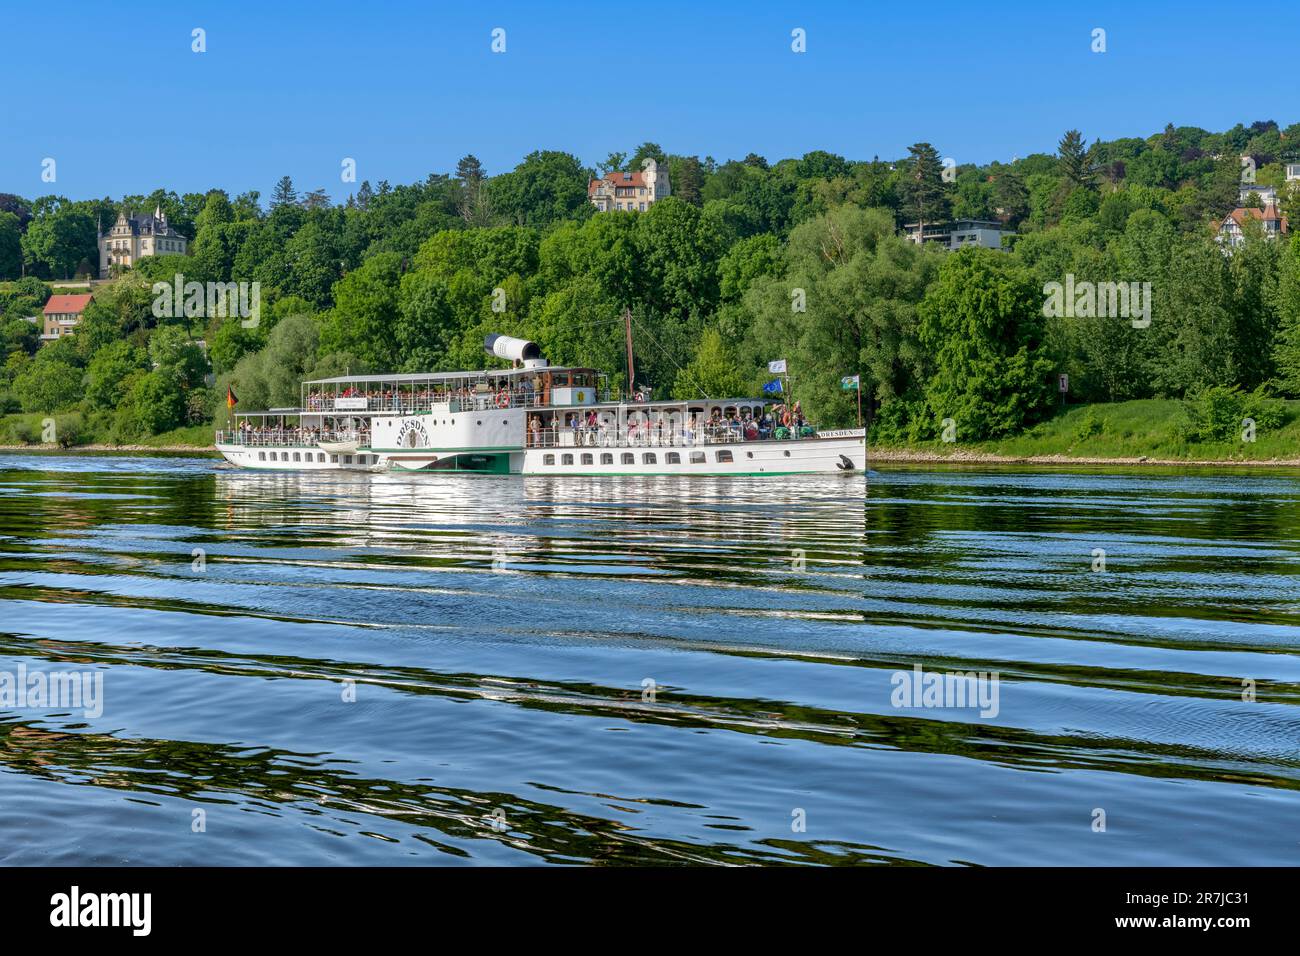 Paddle steamship Dresden with chimney lowered to sail under Loschwitz Bridge on the River Elbe. In the background is the leafy district of Loschwitz. Stock Photo